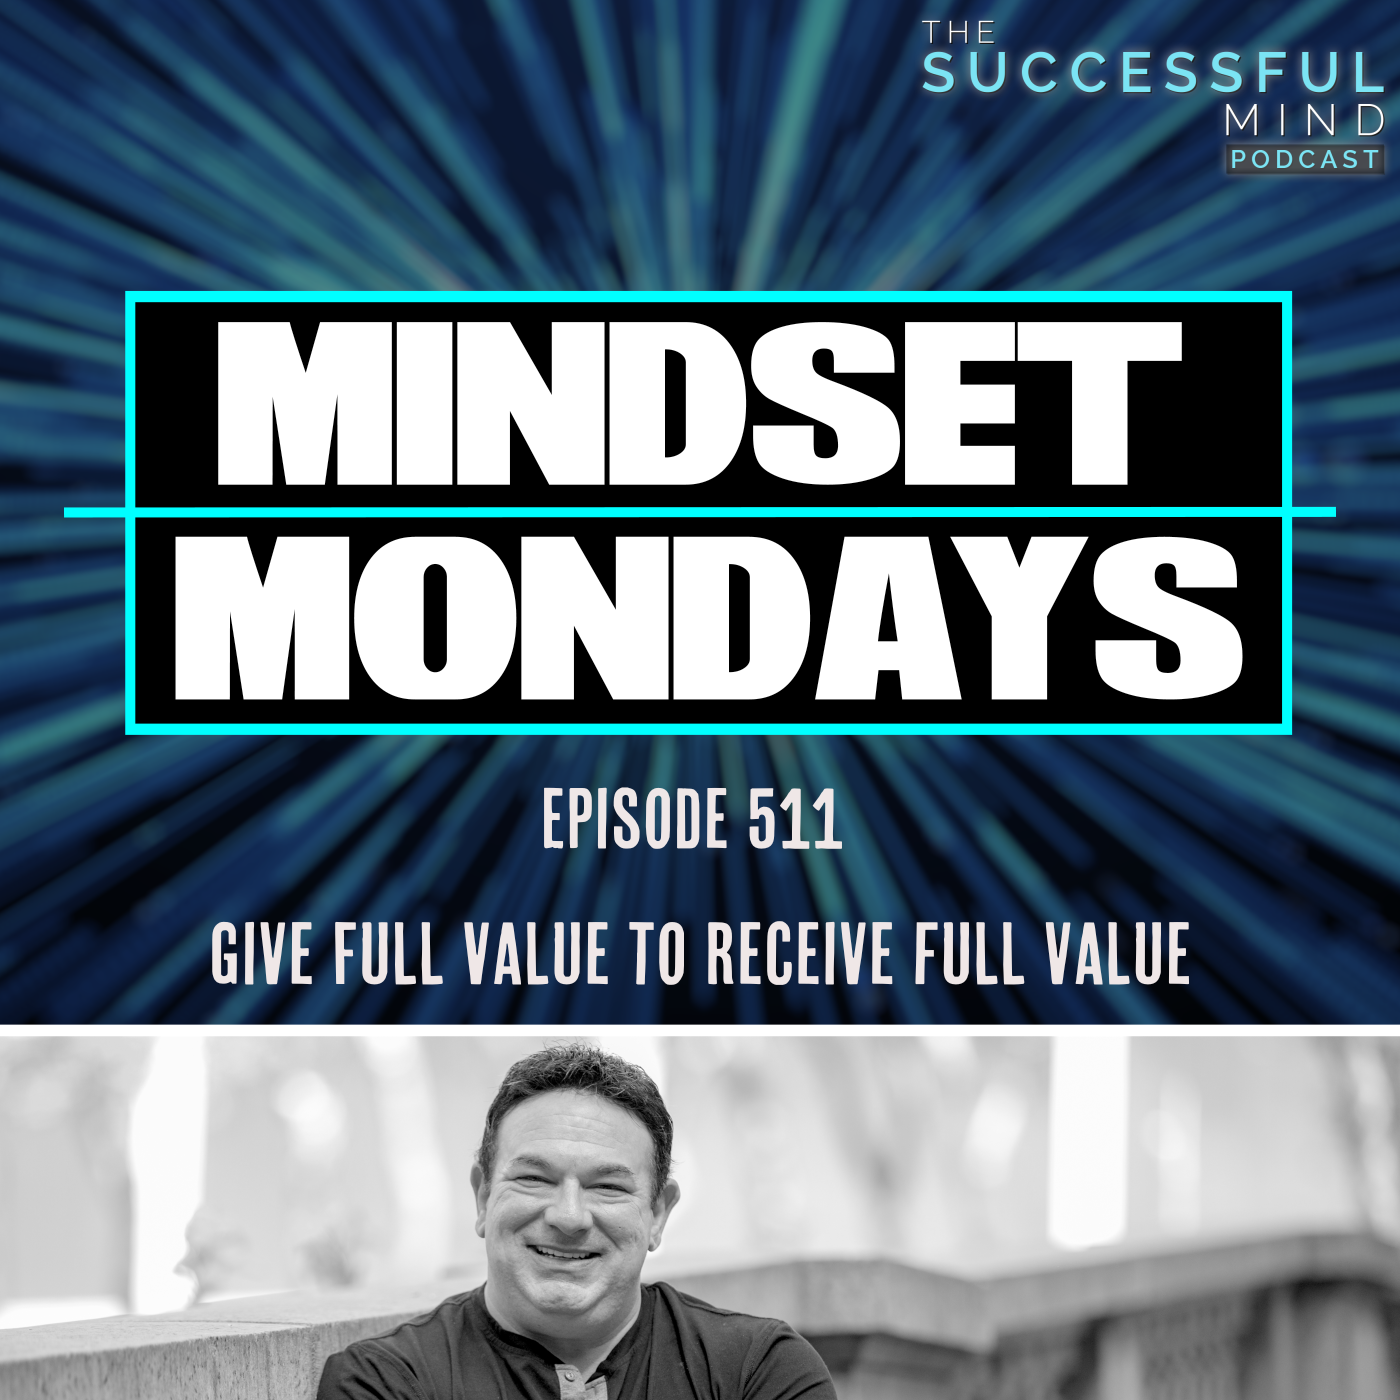 The Successful Mind Podcast - Episode 511 - Give Full Value to Receive Full Value